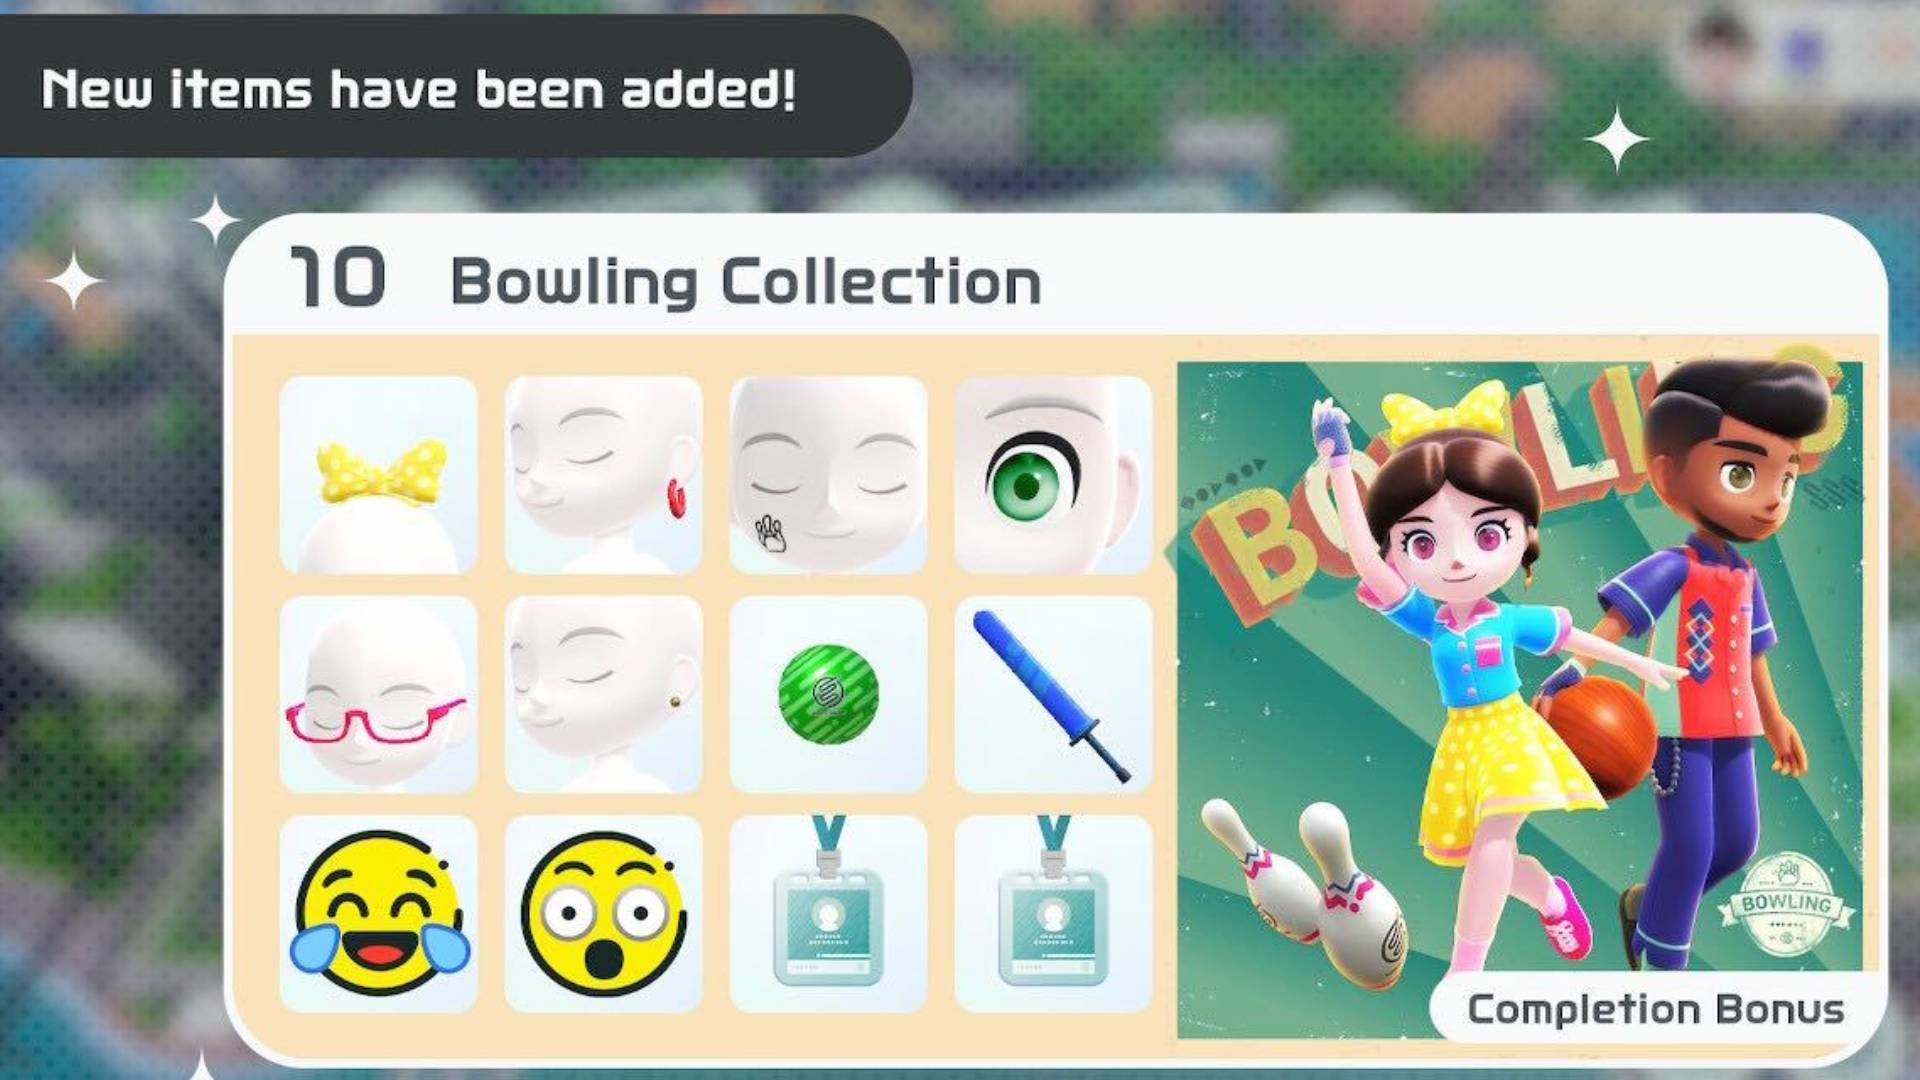 Nintendo Switch Sports cosmetics: A menu shows several different outfits for players of Nintendo Switch Sports, based on the theme of bowling 